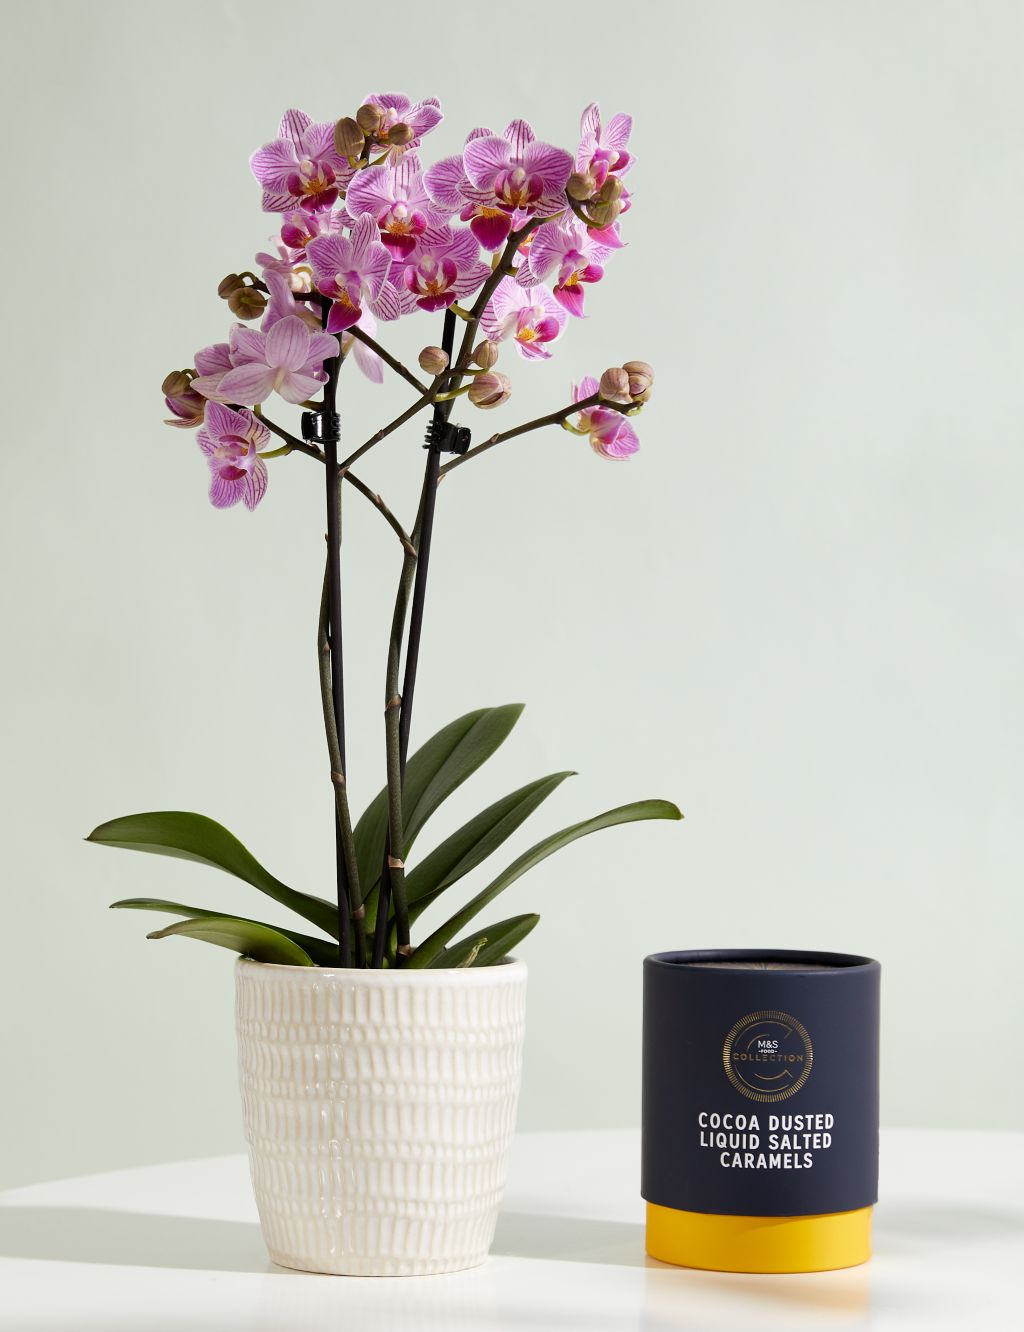 Miniature Pink Phalaenopsis Orchid Ceramic & Cocoa Dusted Liquid Salted Caramels Bundle